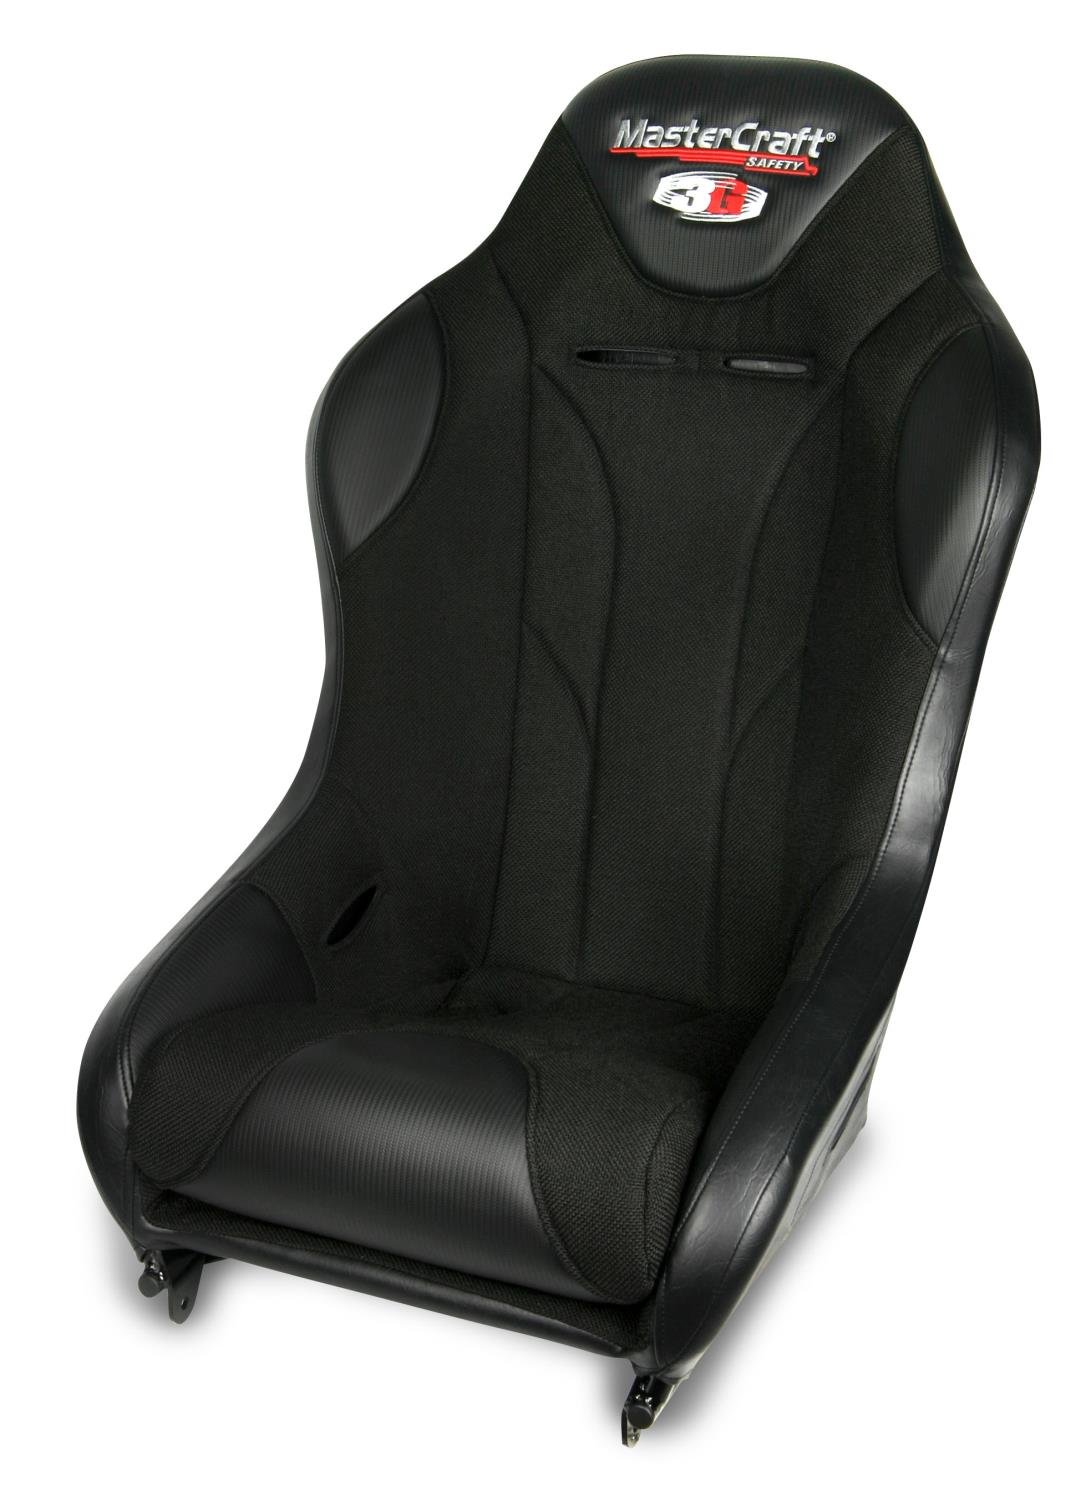 572024 1 in. WIDER 3G-4 Seat w/DirtSport Stitch Pattern, Black with Black Fabric Center and Side Panels, Black Band